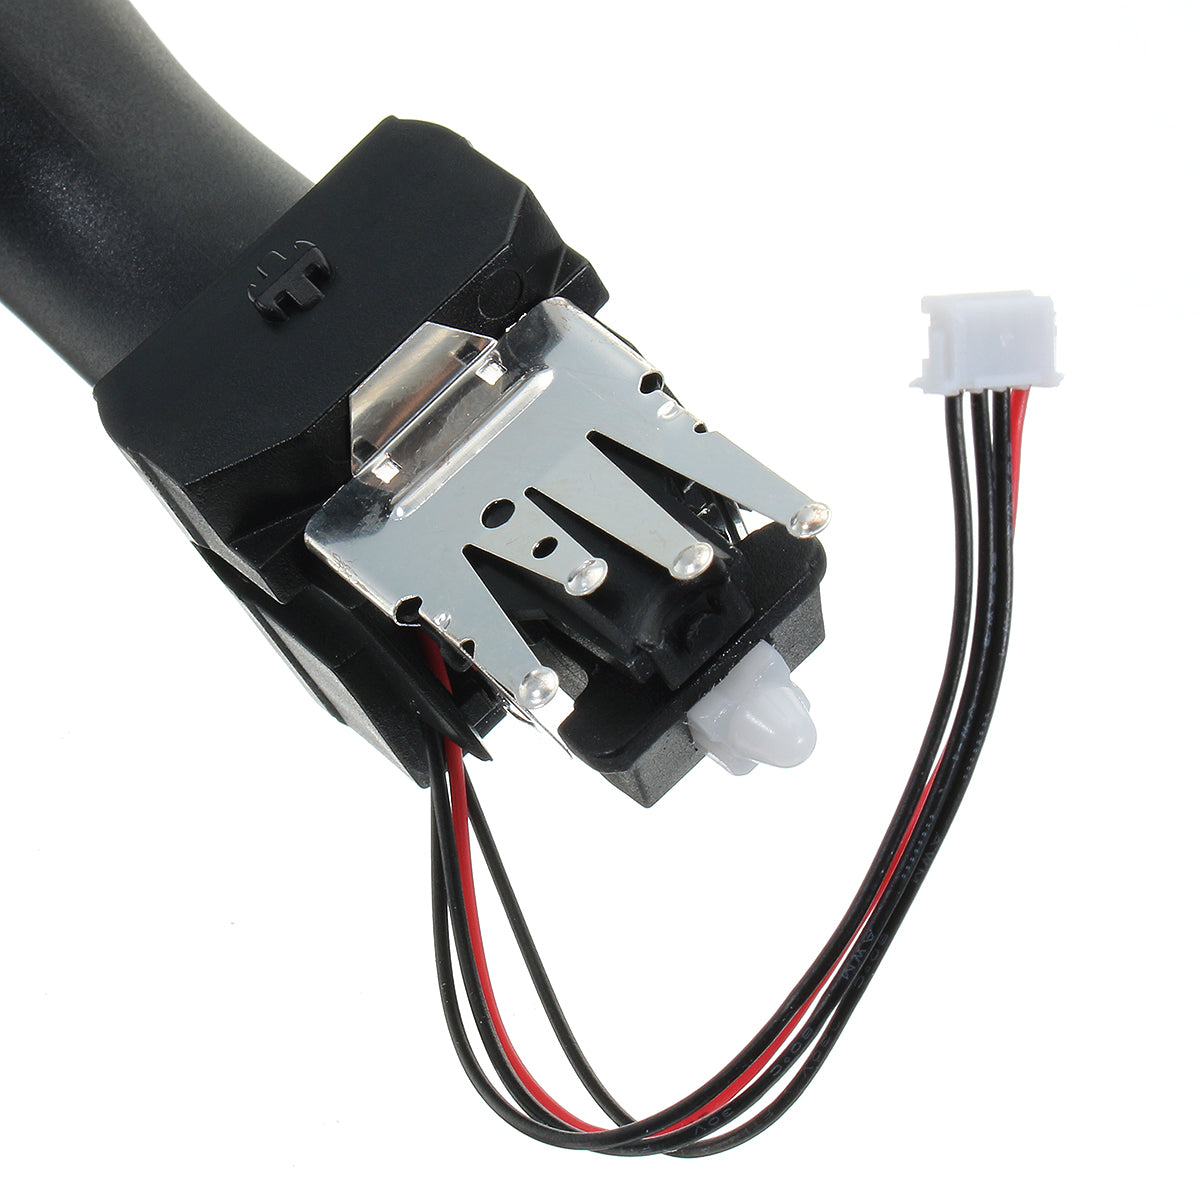 Gray Indicator Turn Signal Light Headlight Stalk Switch with Wiring For Peugeot 307 301 308 206 207 405 407 408